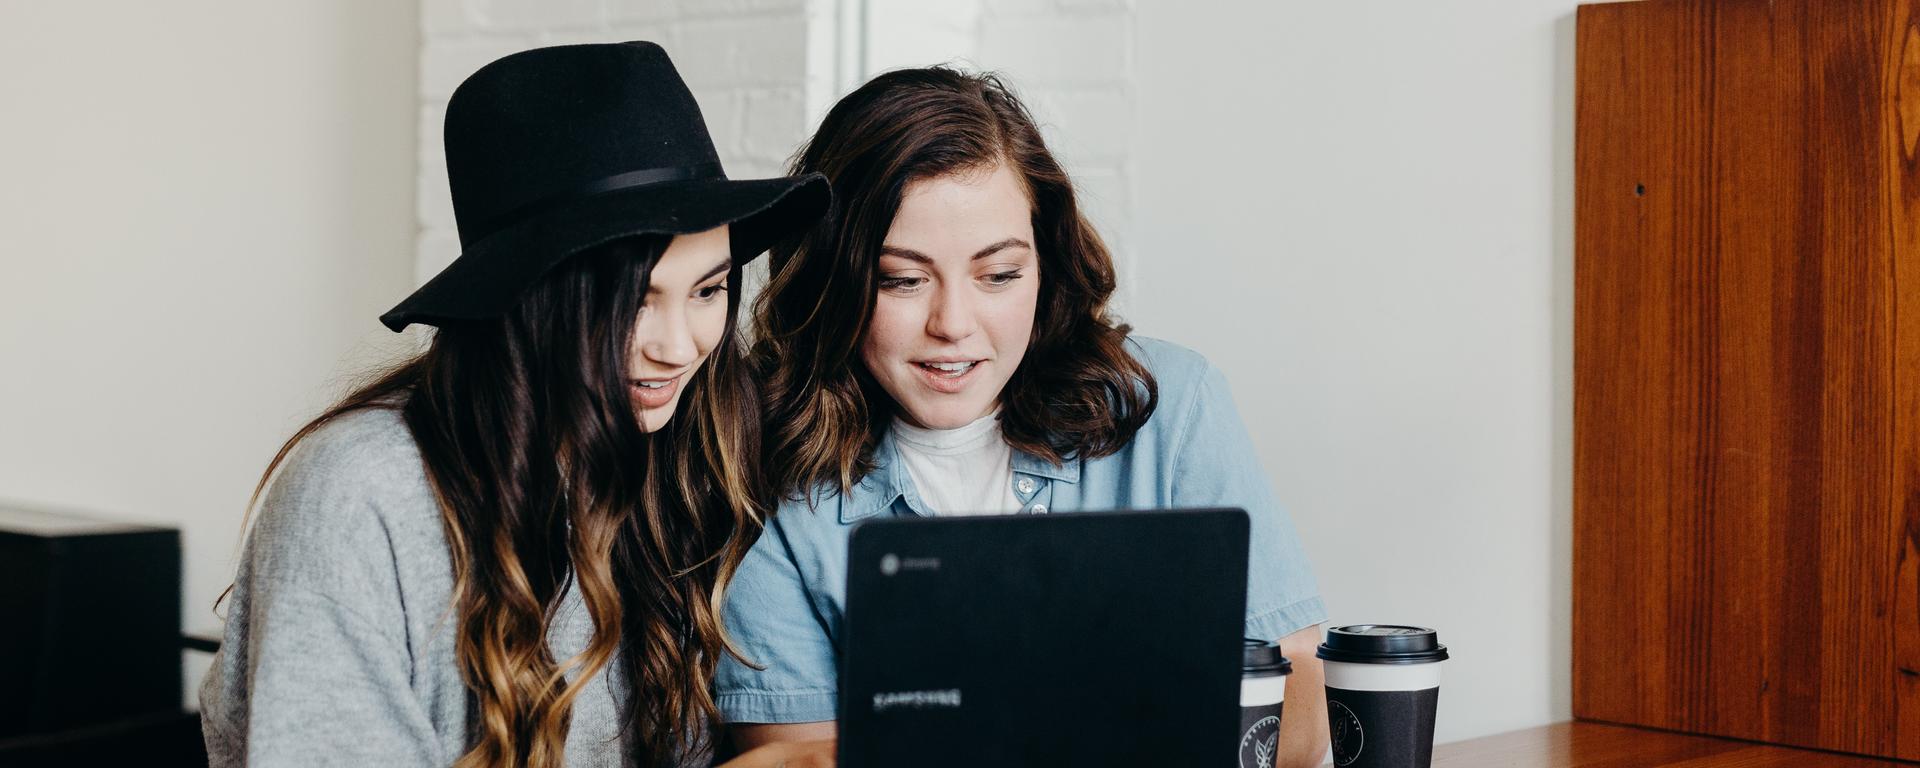 Two young women looking at a laptop together